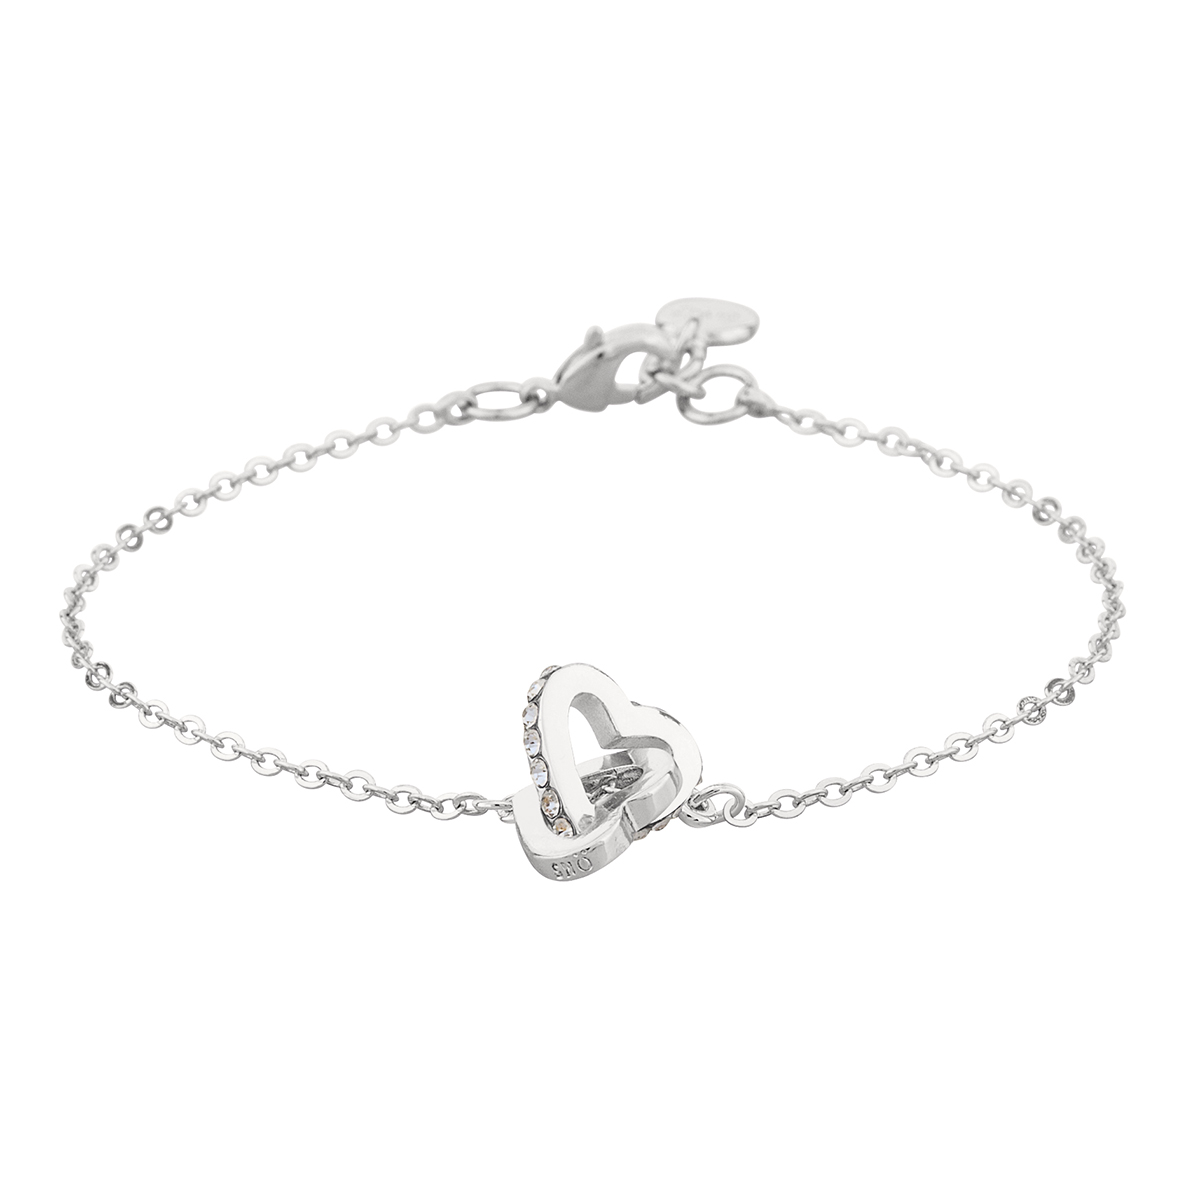 Connected Heart armband, silver